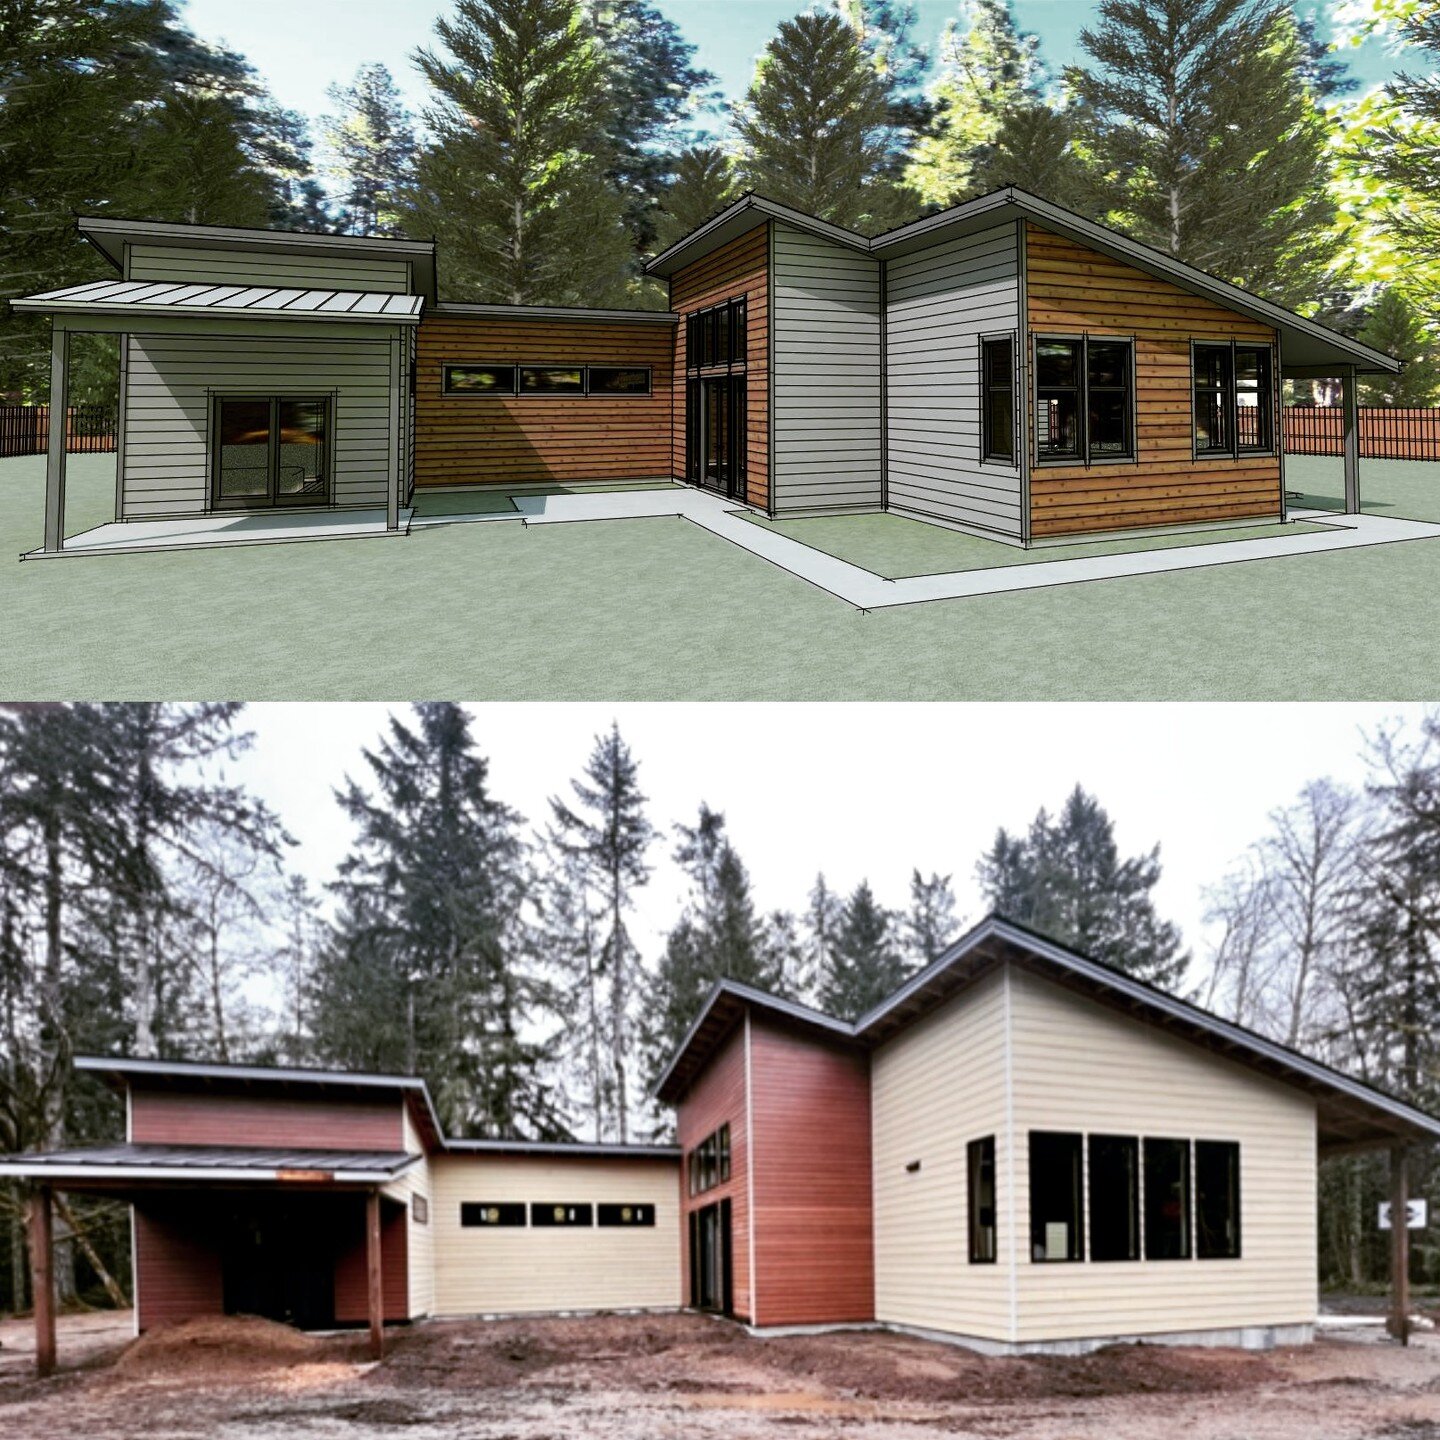 Ramsey residence is coming along nicely, thanks to @thale_construction. Looking forward to the finished product, very much!

#newhome #constructionprogress #homedesign #homedesigns #chiefarchitect #masoncountywa #drafting #architecturaldesign